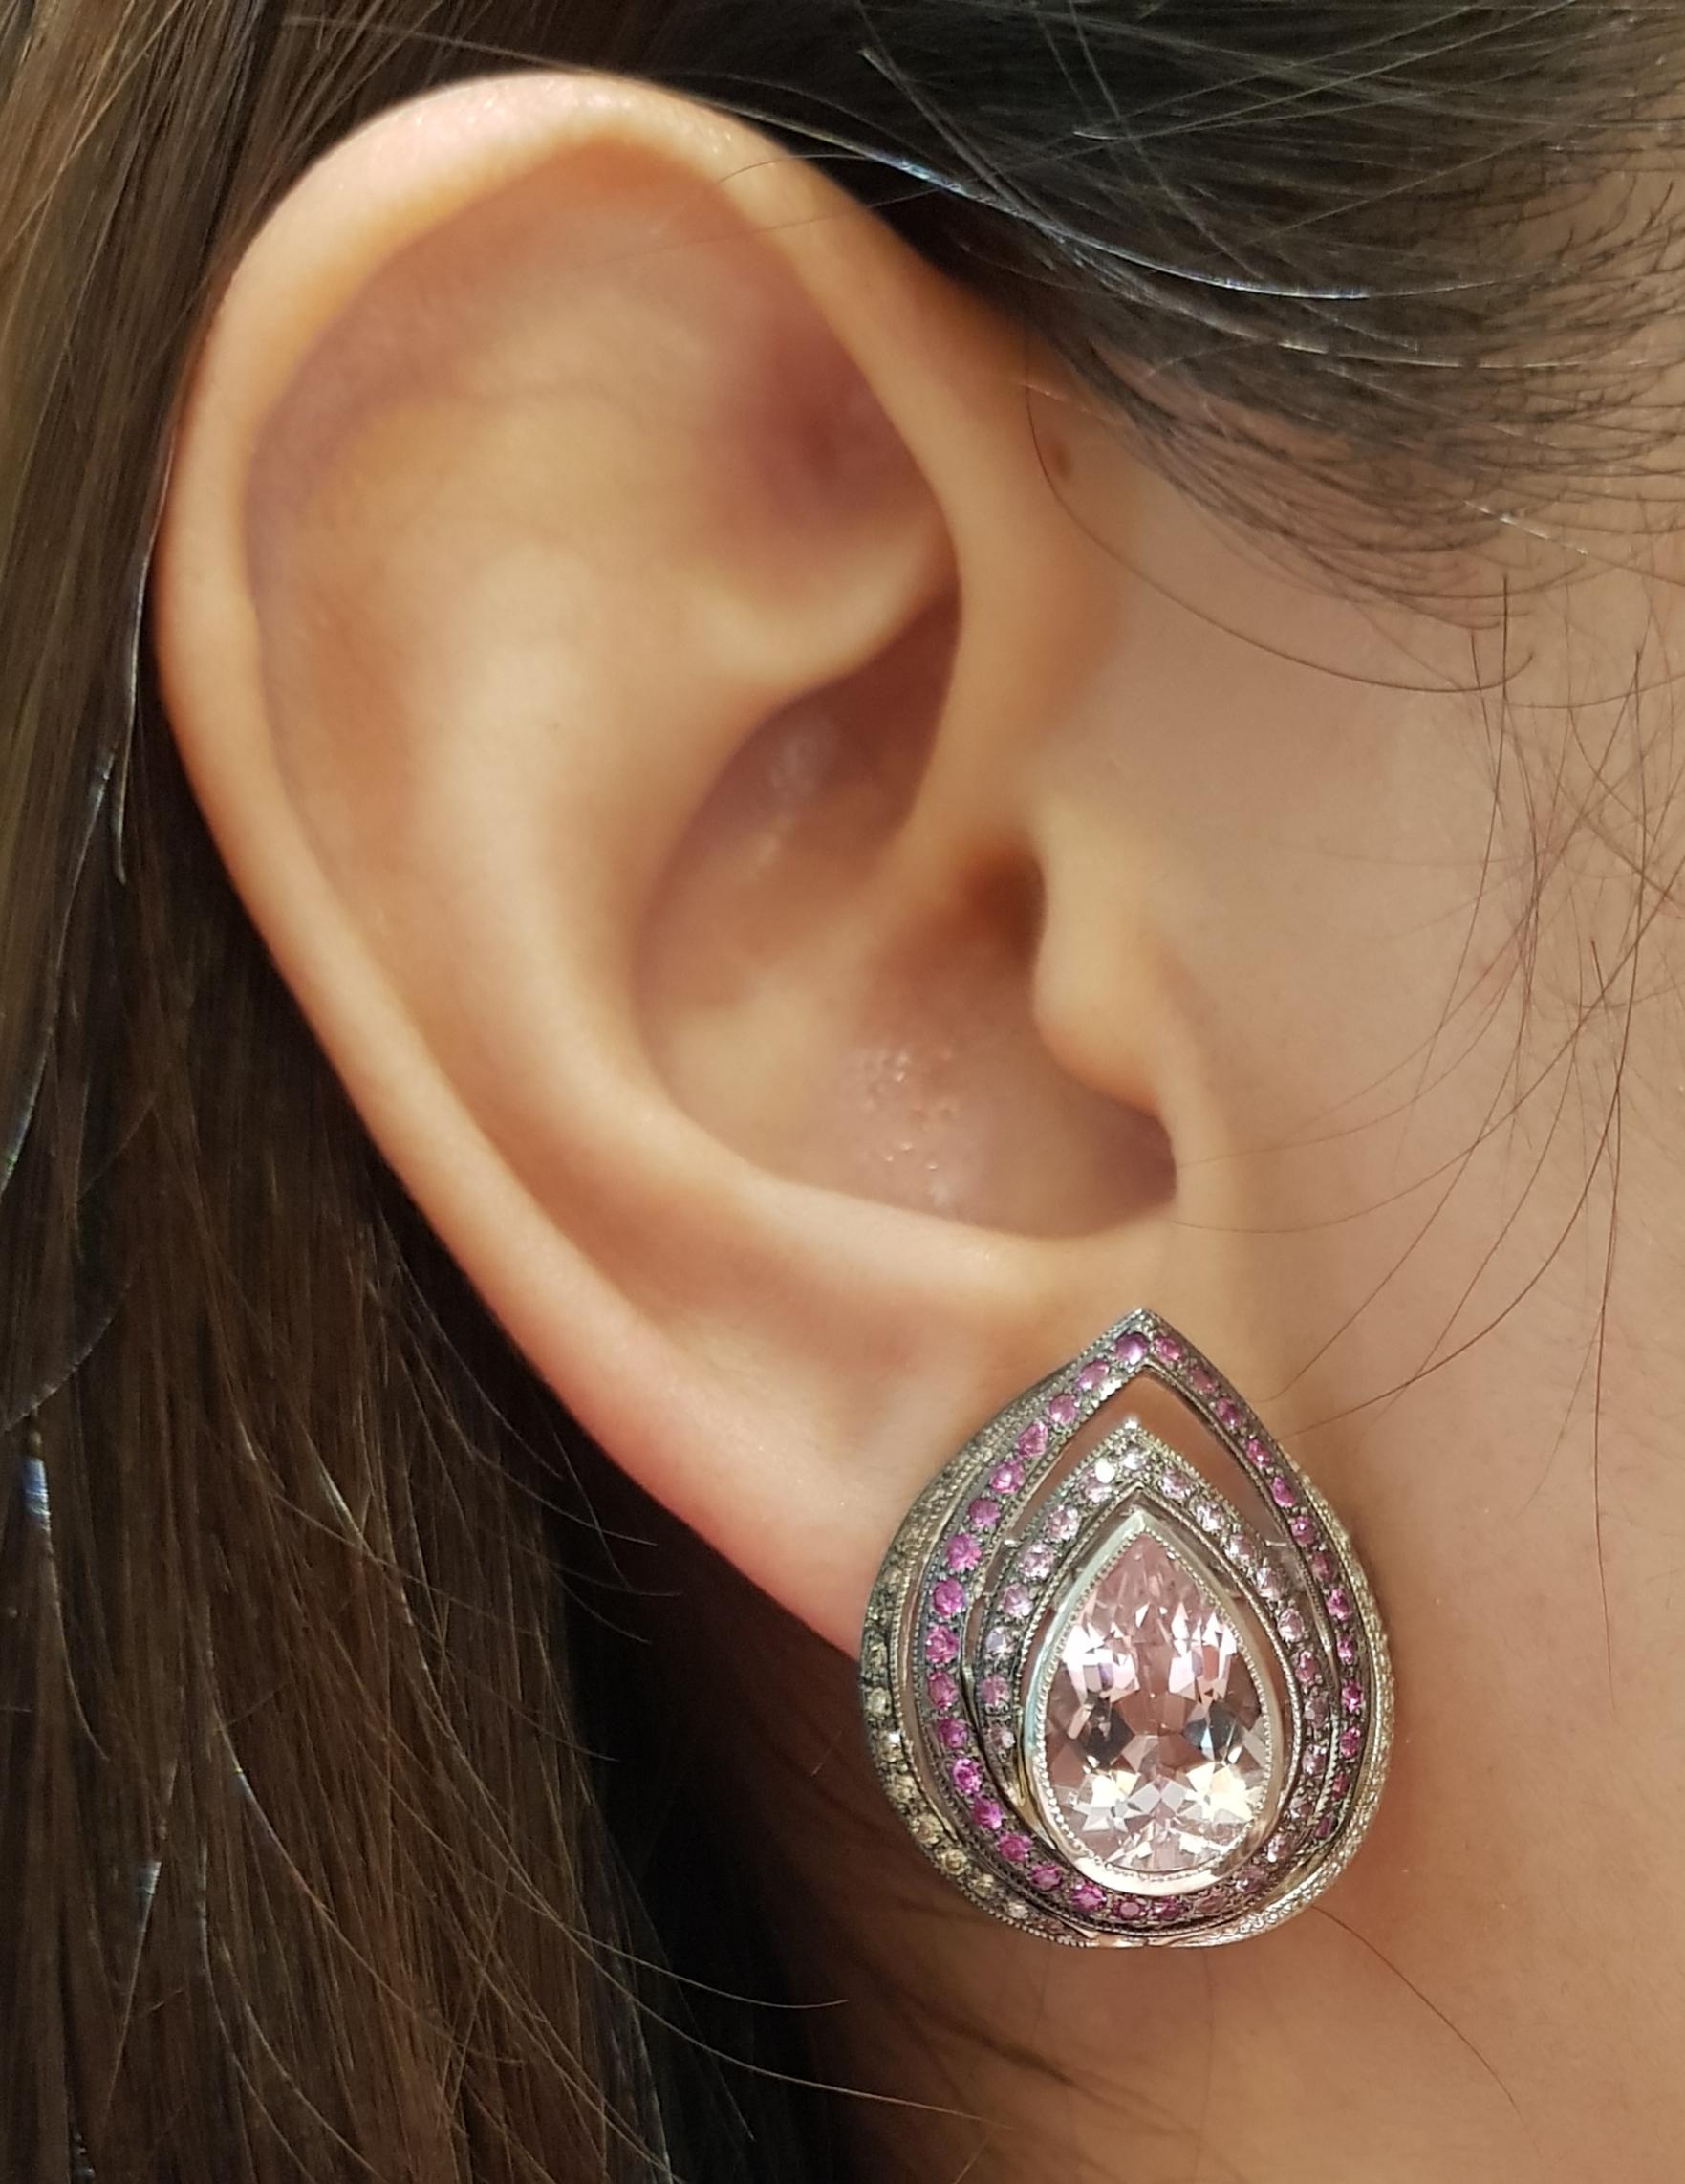 Kunzite 5.55 carats, Pink Sapphire 1.13 carats with Diamond 0.13 carat Earrings set in 18 Karat White Gold Settings

Width:  2.0 cm 
Length: 2.4 cm
Total Weight: 15.29 grams

